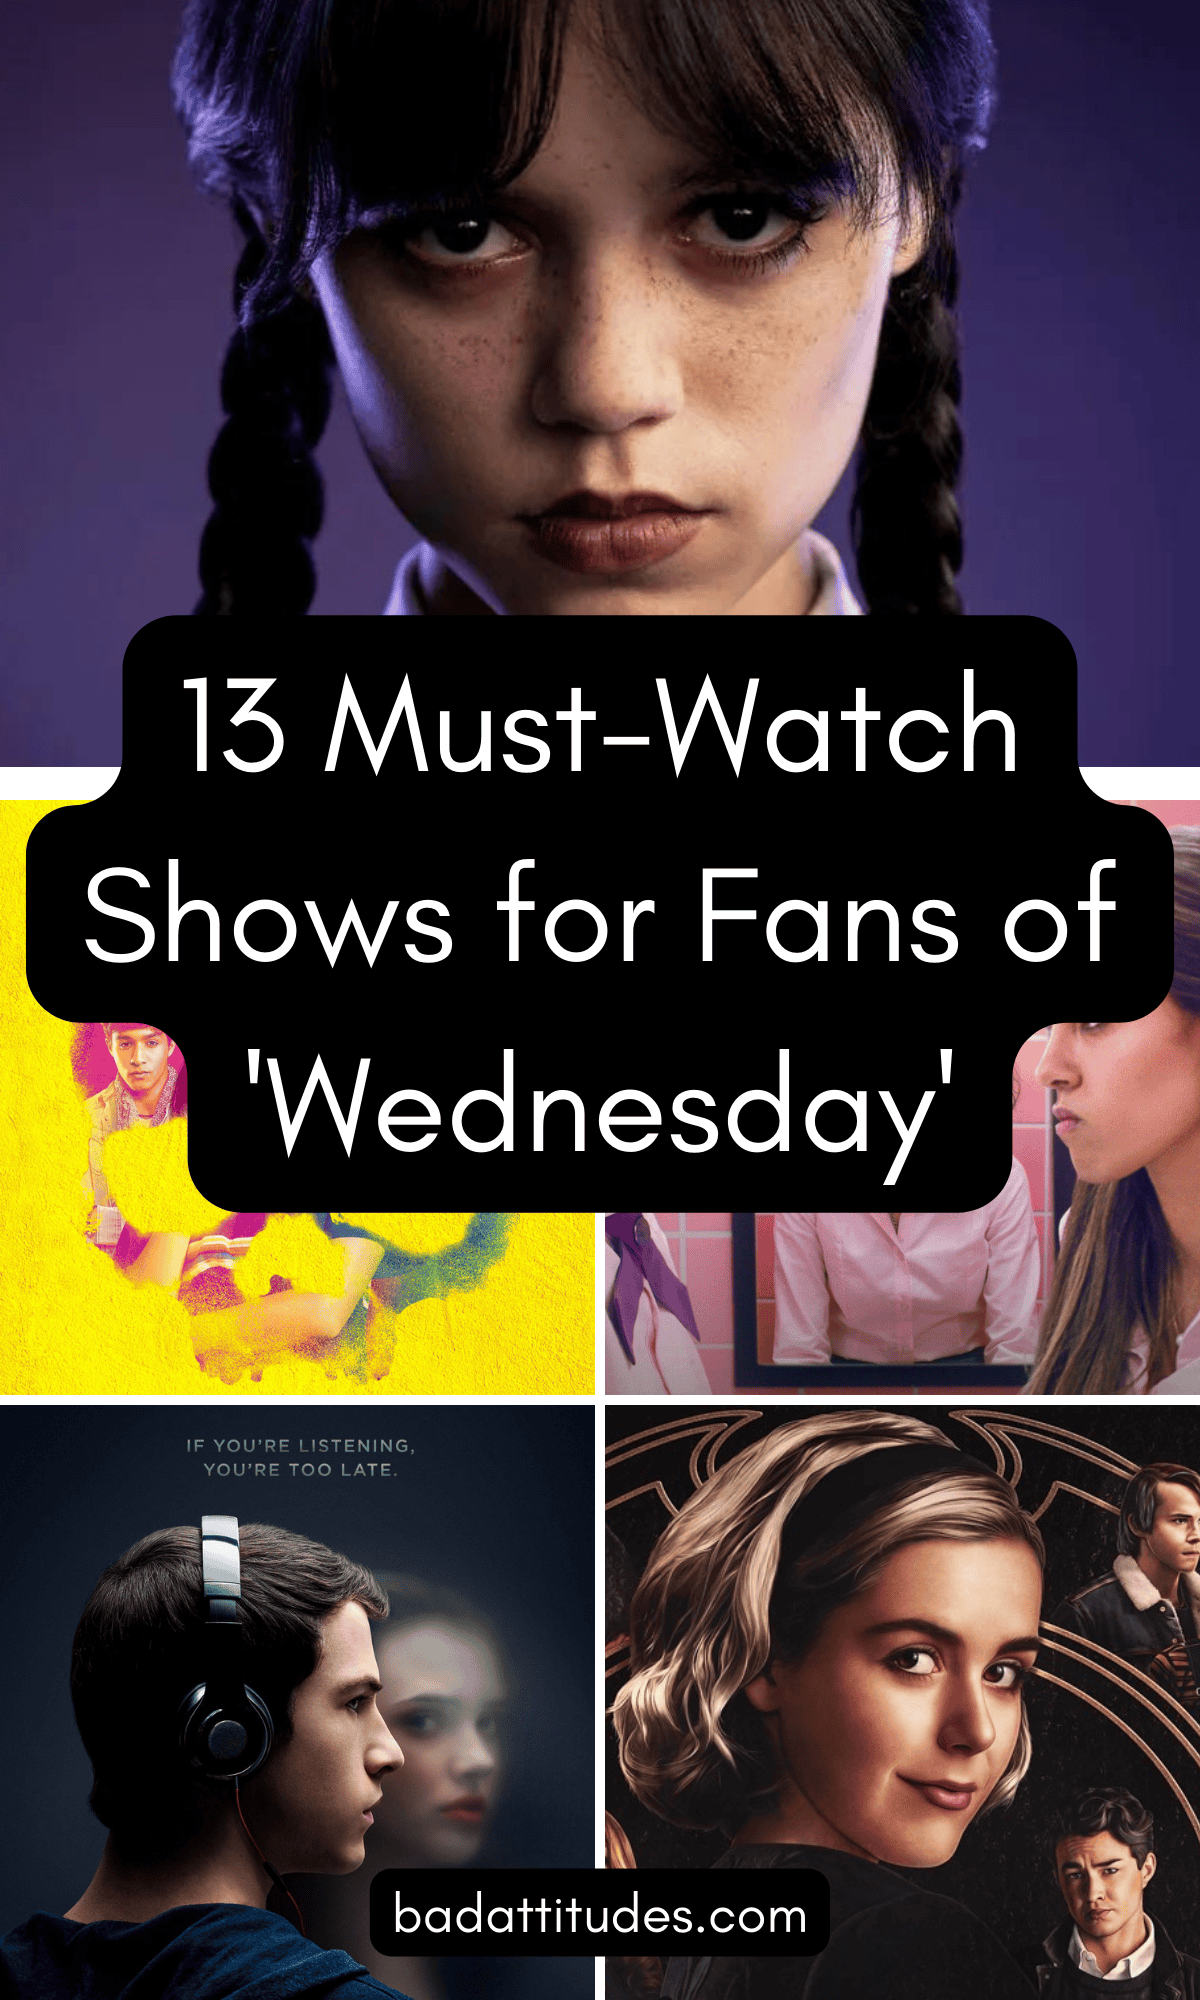 13 Must-Watch Shows for Fans of 'Wednesday' on Netflix